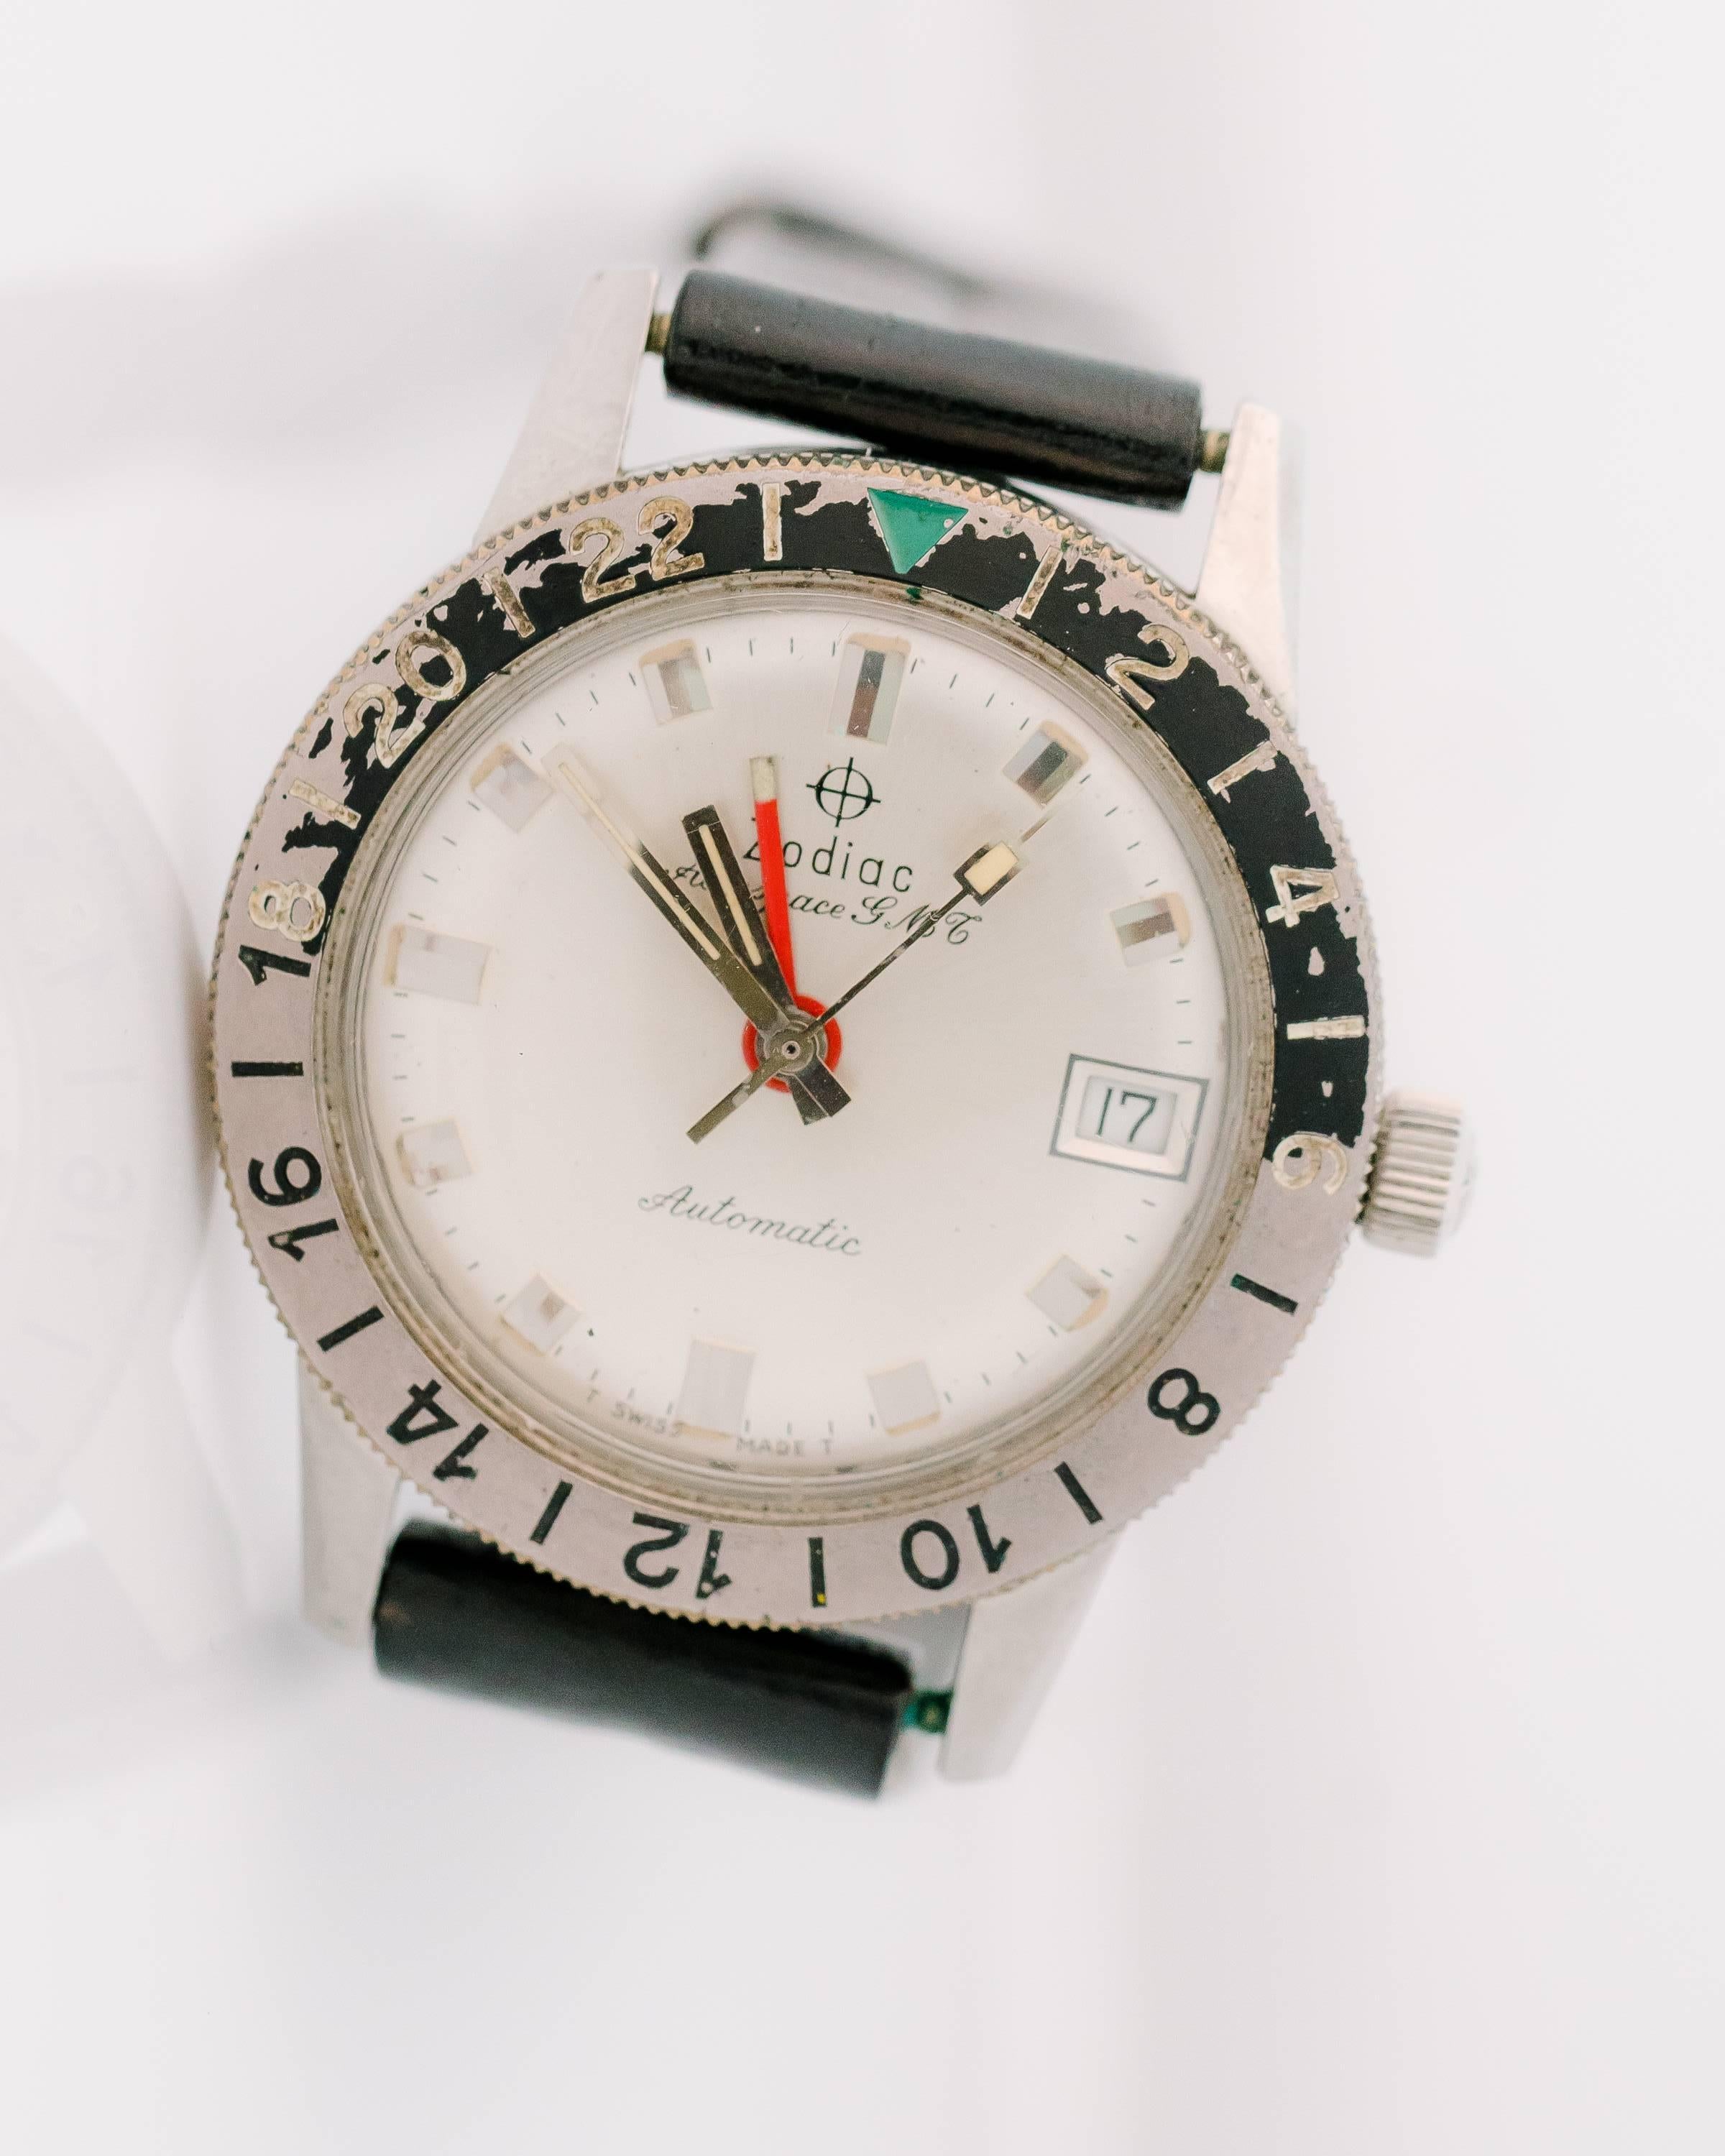 This 1950s Retro Zodiac Aerospace GMT Automatic Stainless Steel unisex wrist watch was designed with the world traveler in mind! The 24 hour black and grey rotating bezel has a green triangle 24 hour index. This allows the wearer to adjust for